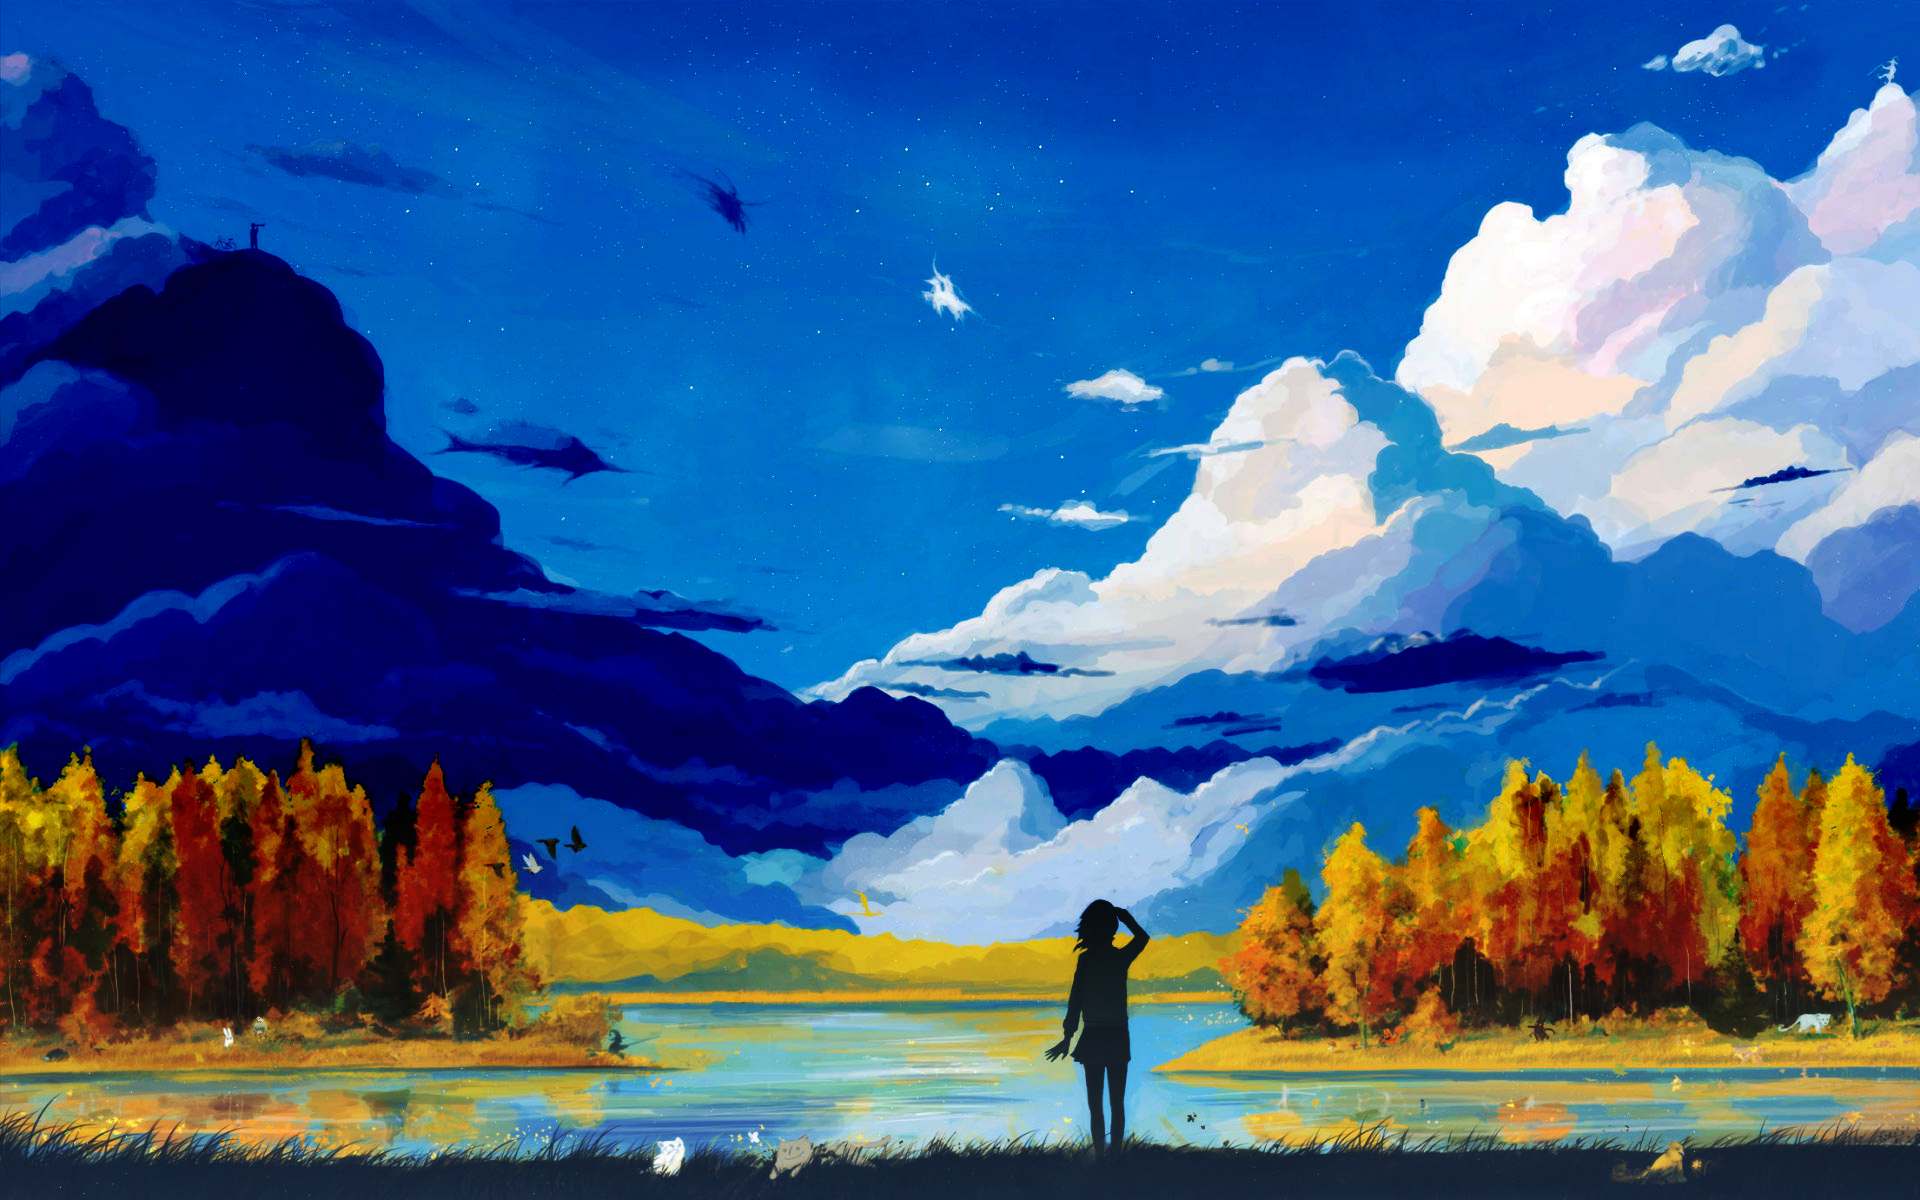 wallpaper wednesday,natural landscape,sky,painting,nature,acrylic paint